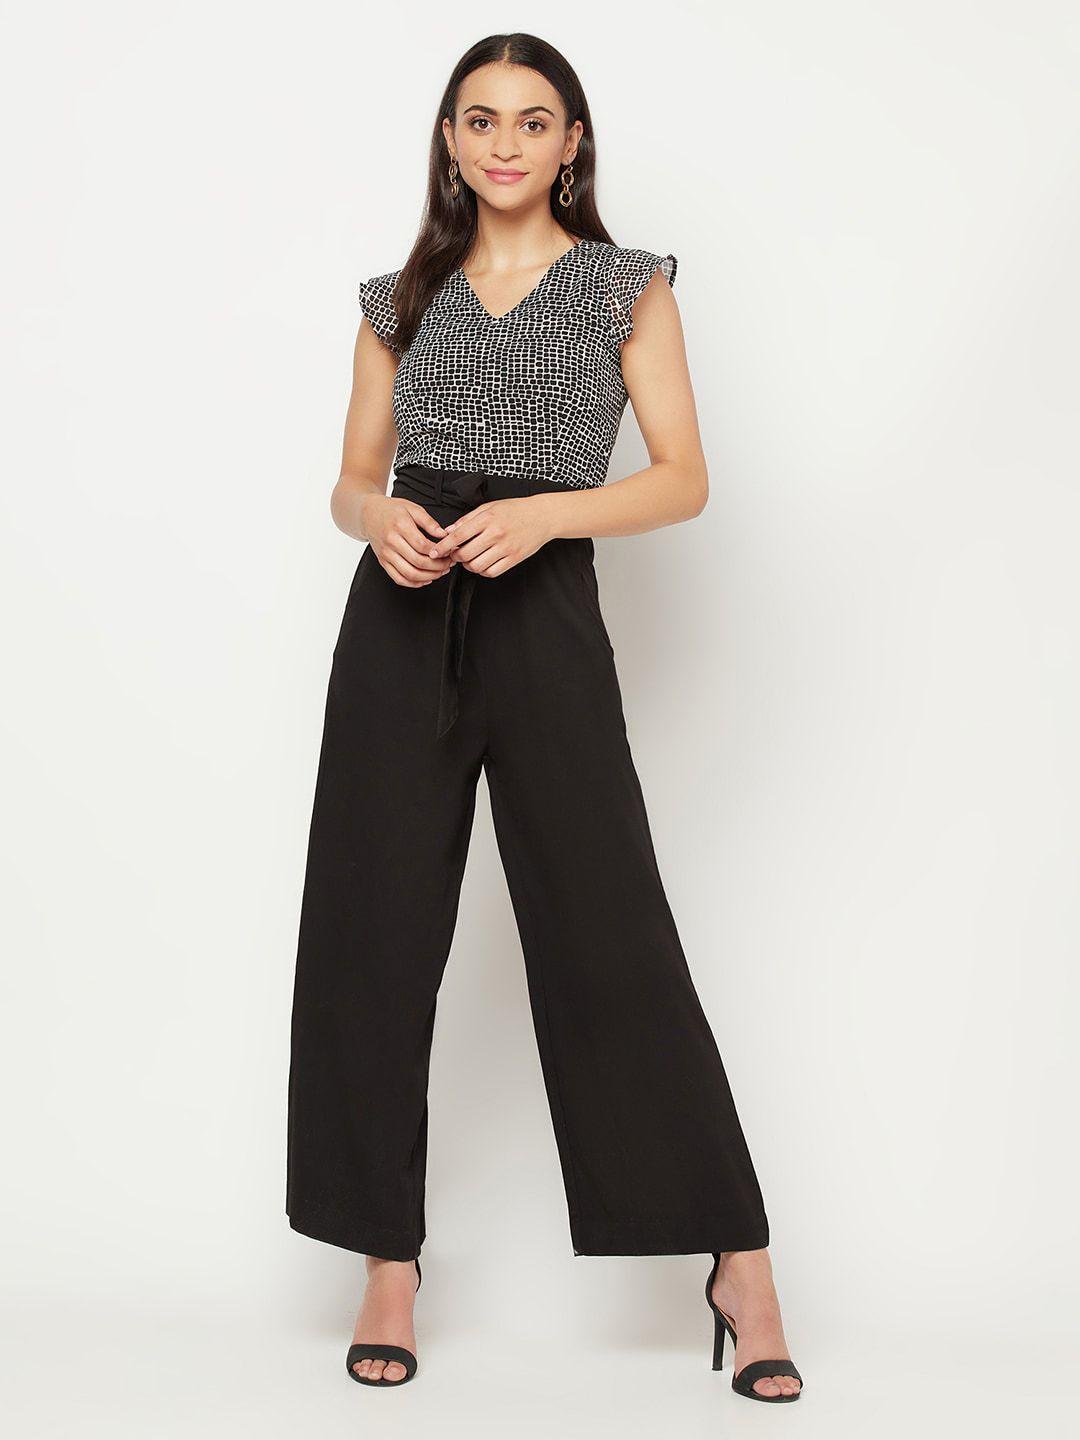 sqew micro ditsy printed v-neck culotte jumpsuit